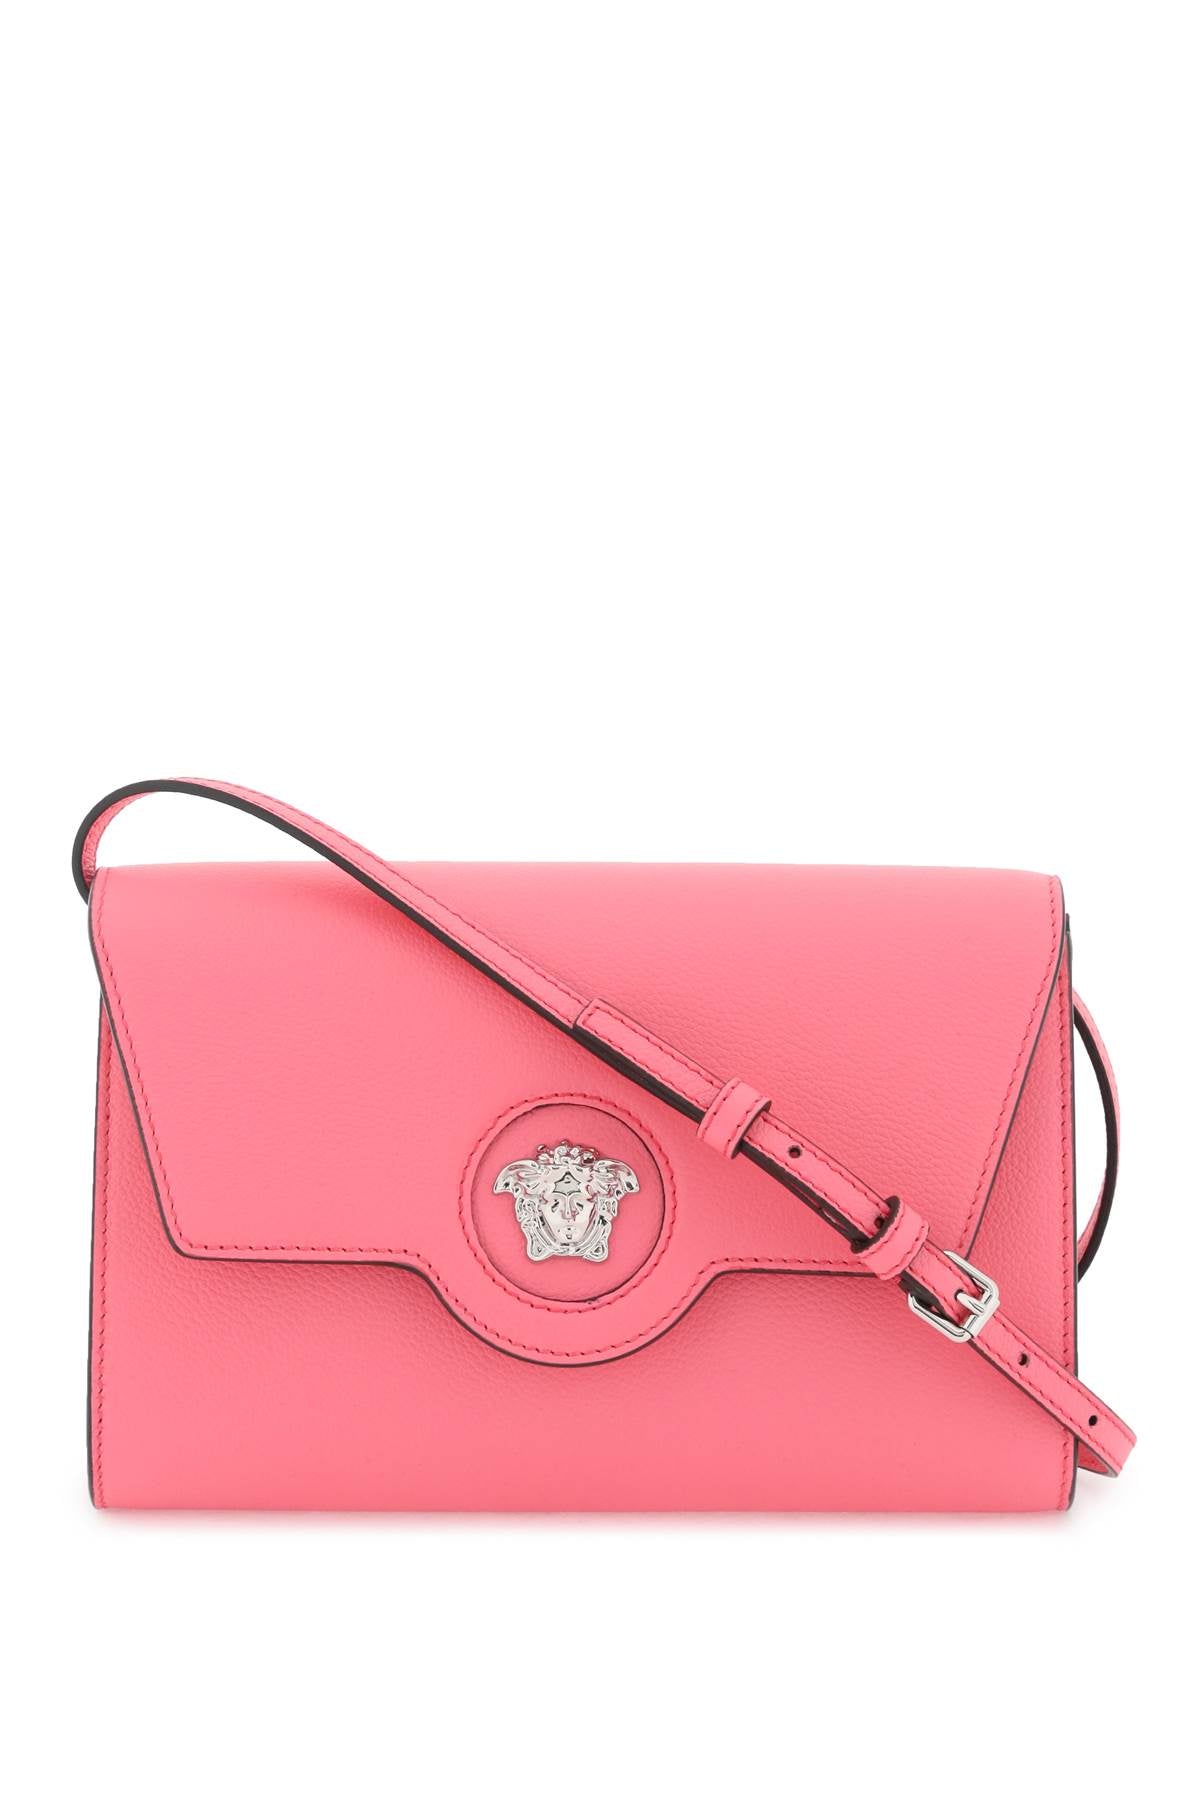 Versace Medusa Leather Crossbody Bag In Red